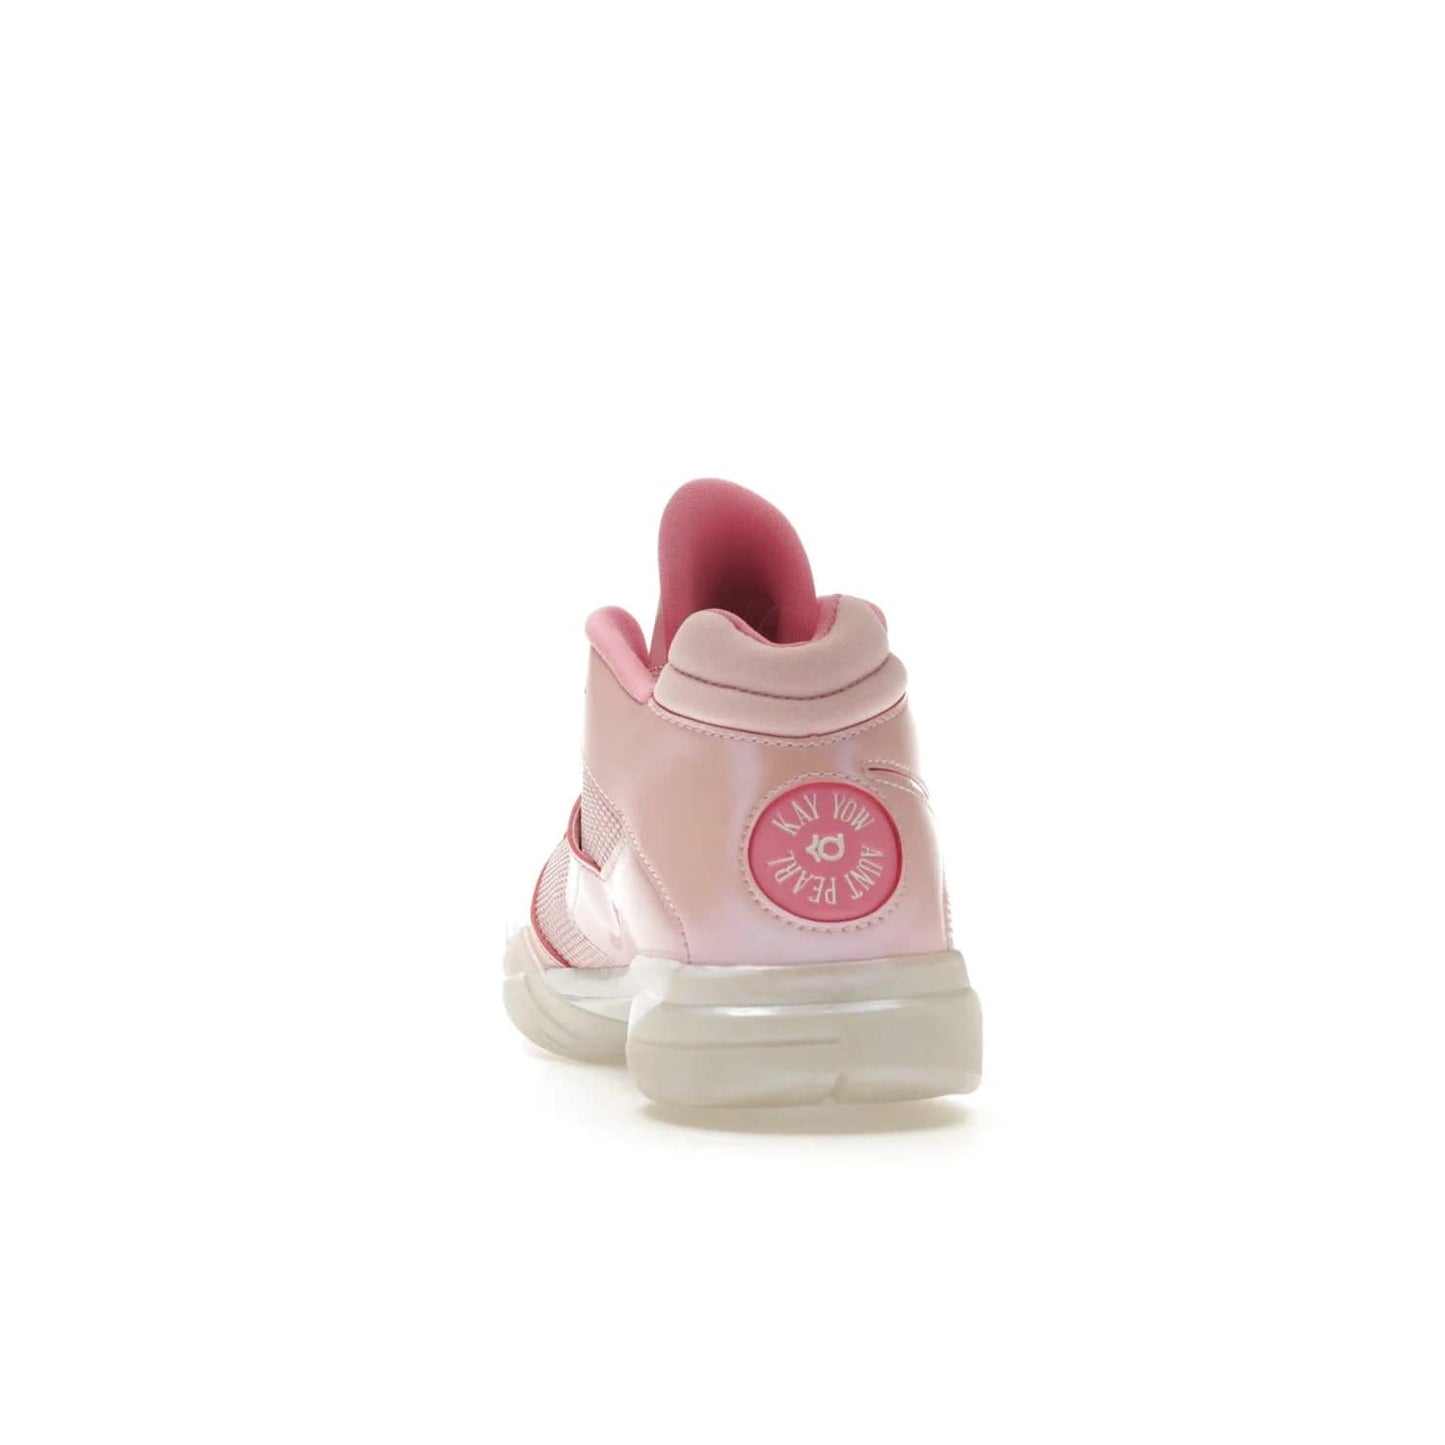 Nike KD 3 Aunt Pearl - Image 27 - Only at www.BallersClubKickz.com - Introducing the Nike KD 3 Aunt Pearl. Featuring a bold Medium Soft Pink, White, & Lotus Pink colorway. Get ready to stand out this October 15th.